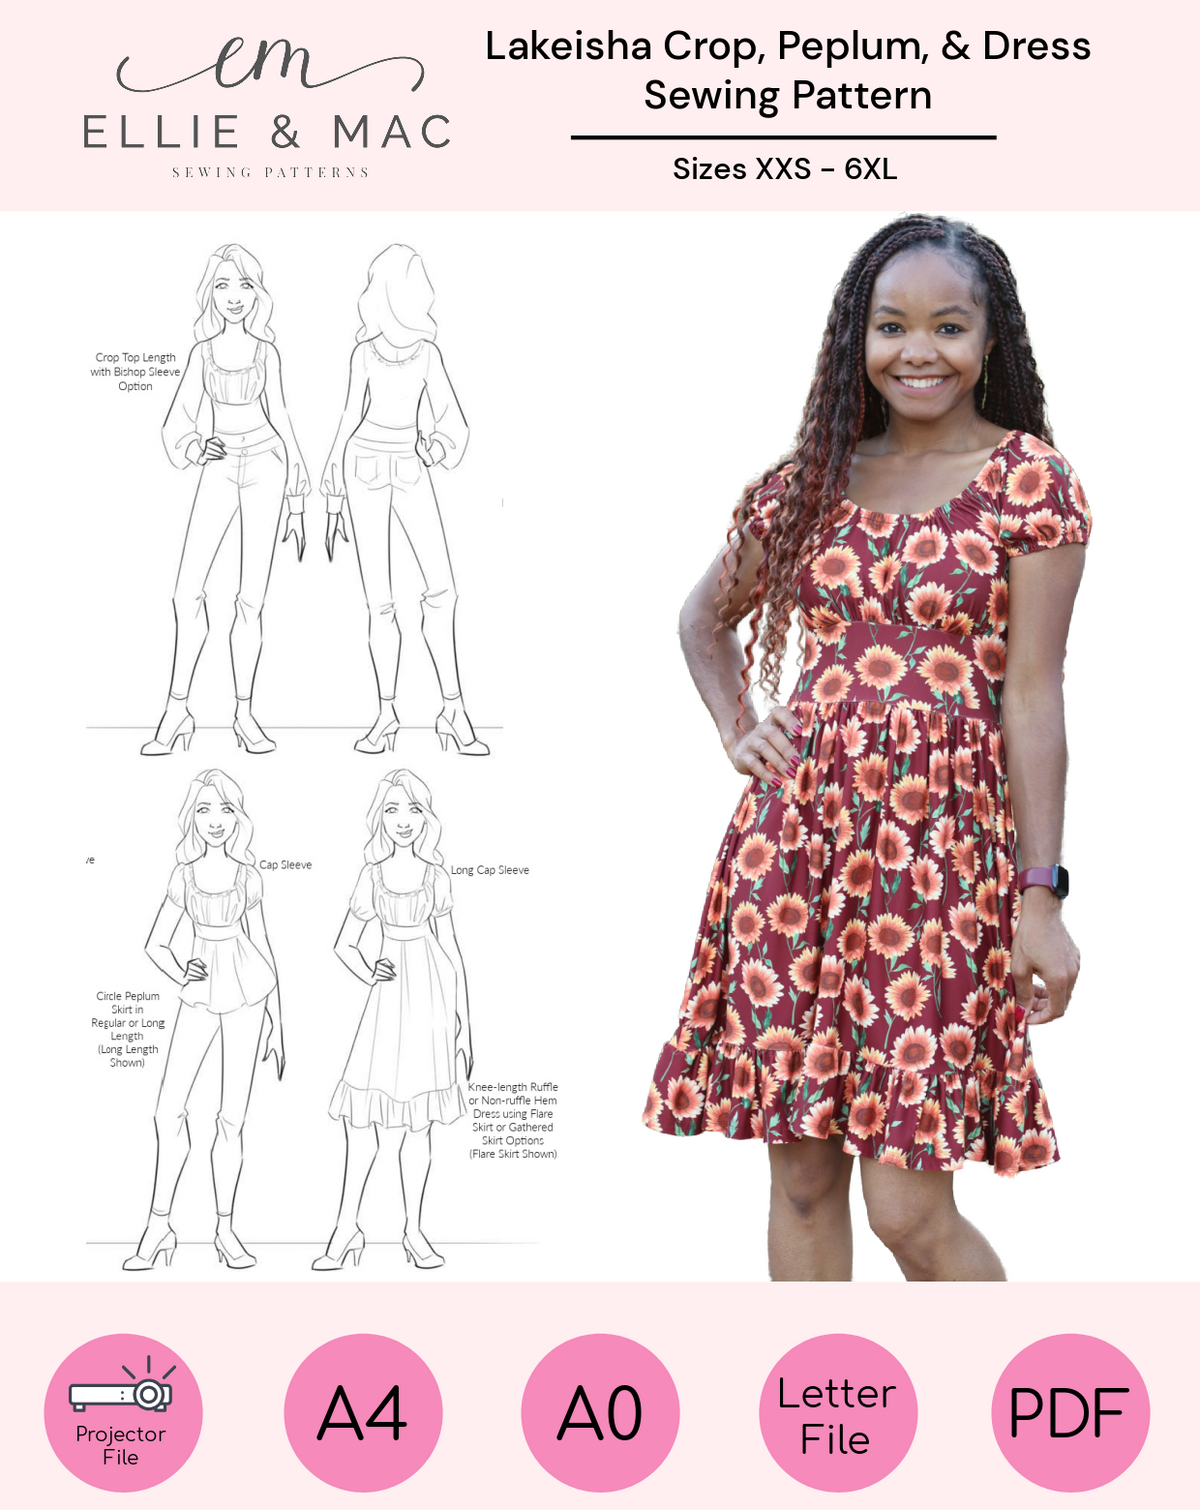 10 FREE Dress Sewing Patterns You'll Love